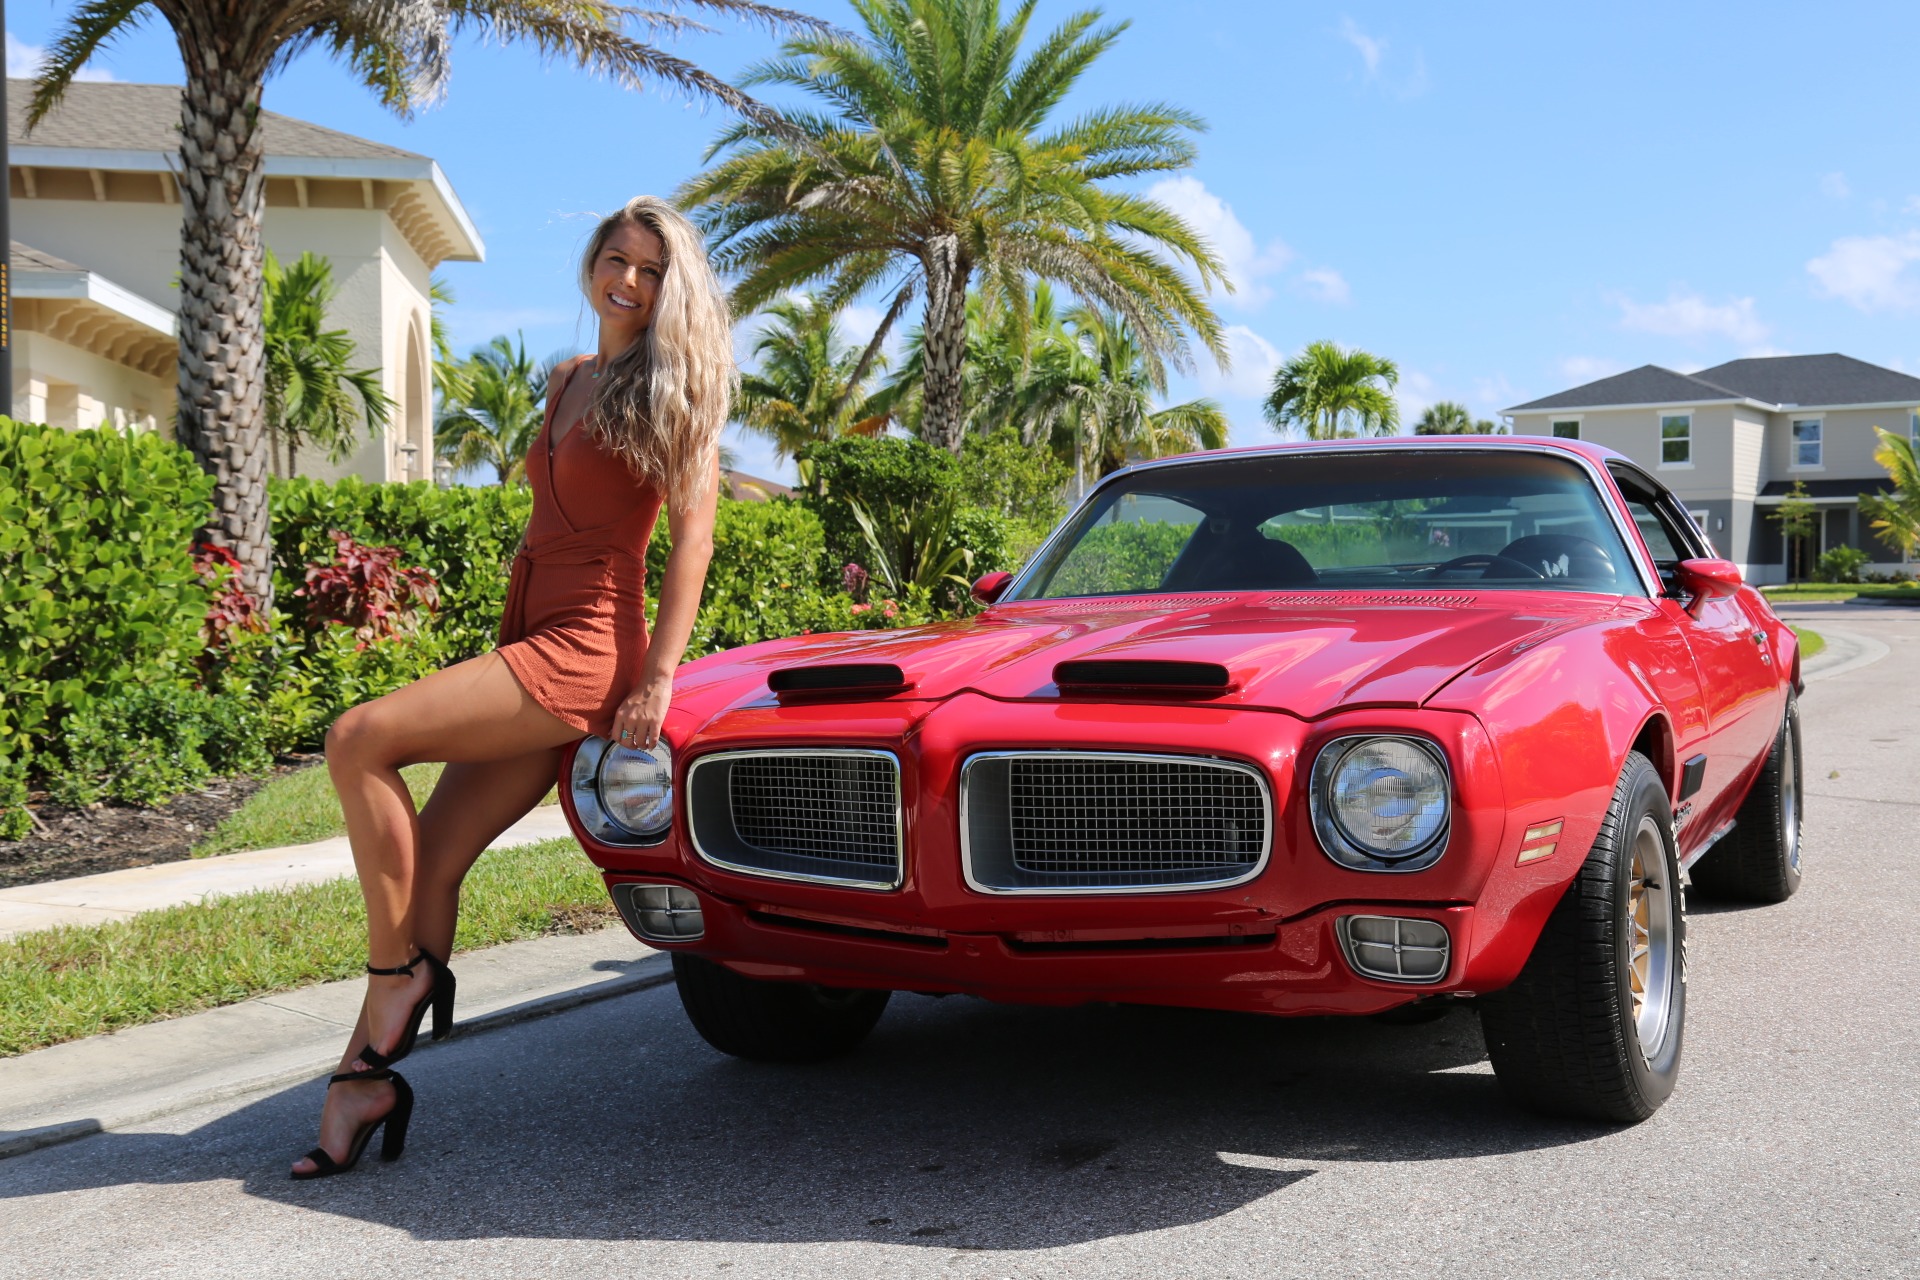 Used 1971 Pontiac Firebird Formula for sale Sold at Muscle Cars for Sale Inc. in Fort Myers FL 33912 2